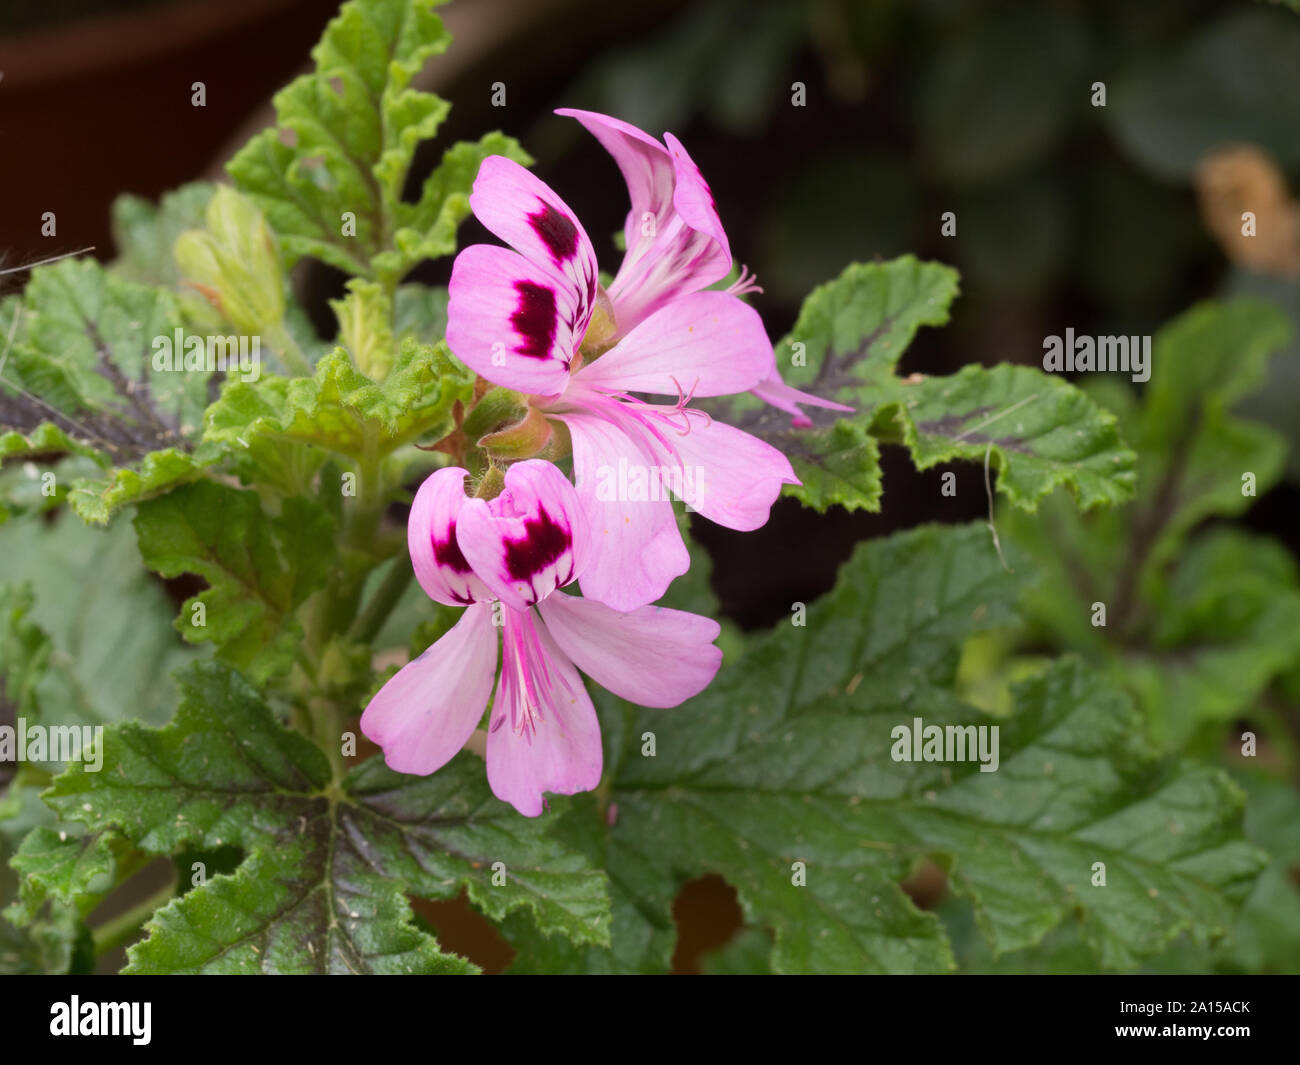 The pale pink flowers of Geranium quercifolia with the typical oak like leves in the background Stock Photo